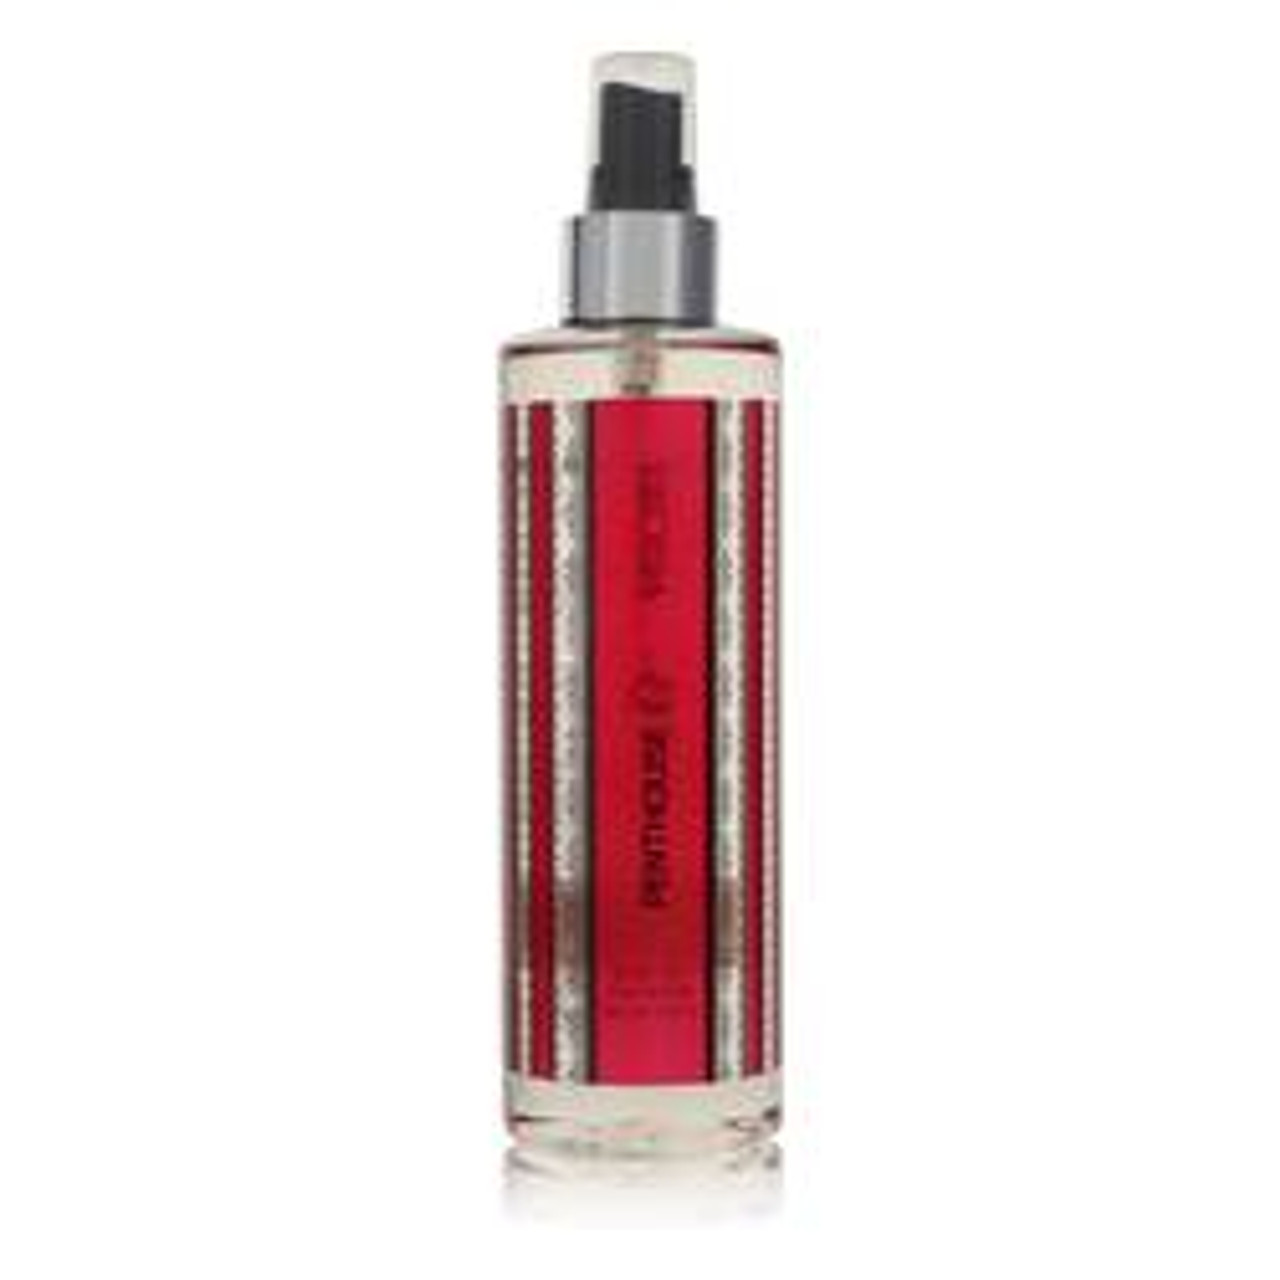 Penthouse Passionate Perfume By Penthouse Body Mist 8.1 oz for Women - [From 23.00 - Choose pk Qty ] - *Ships from Miami